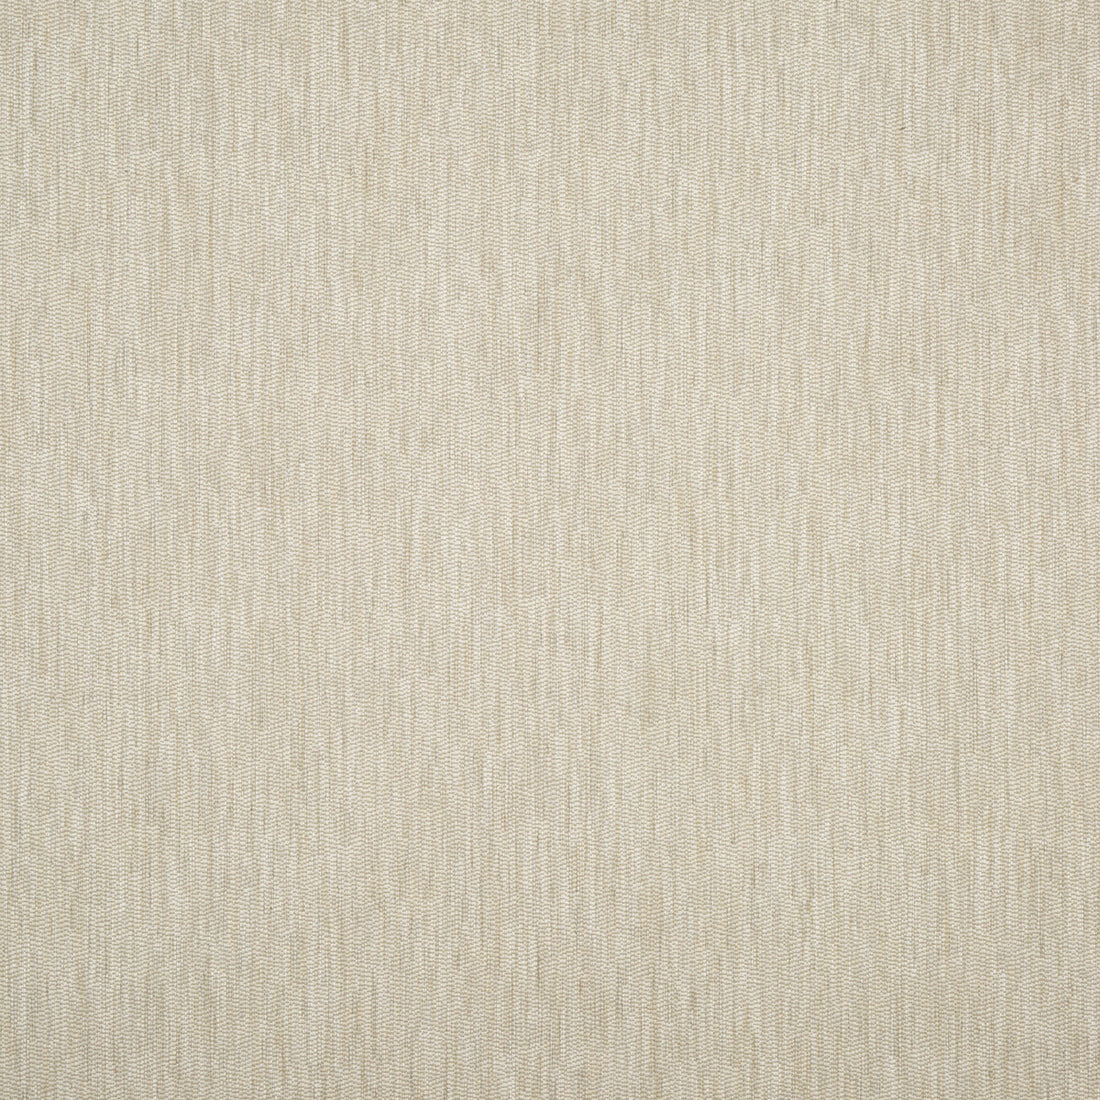 Marcella fabric in champagne color - pattern ED85263.125.0 - by Threads in the Odyssey collection